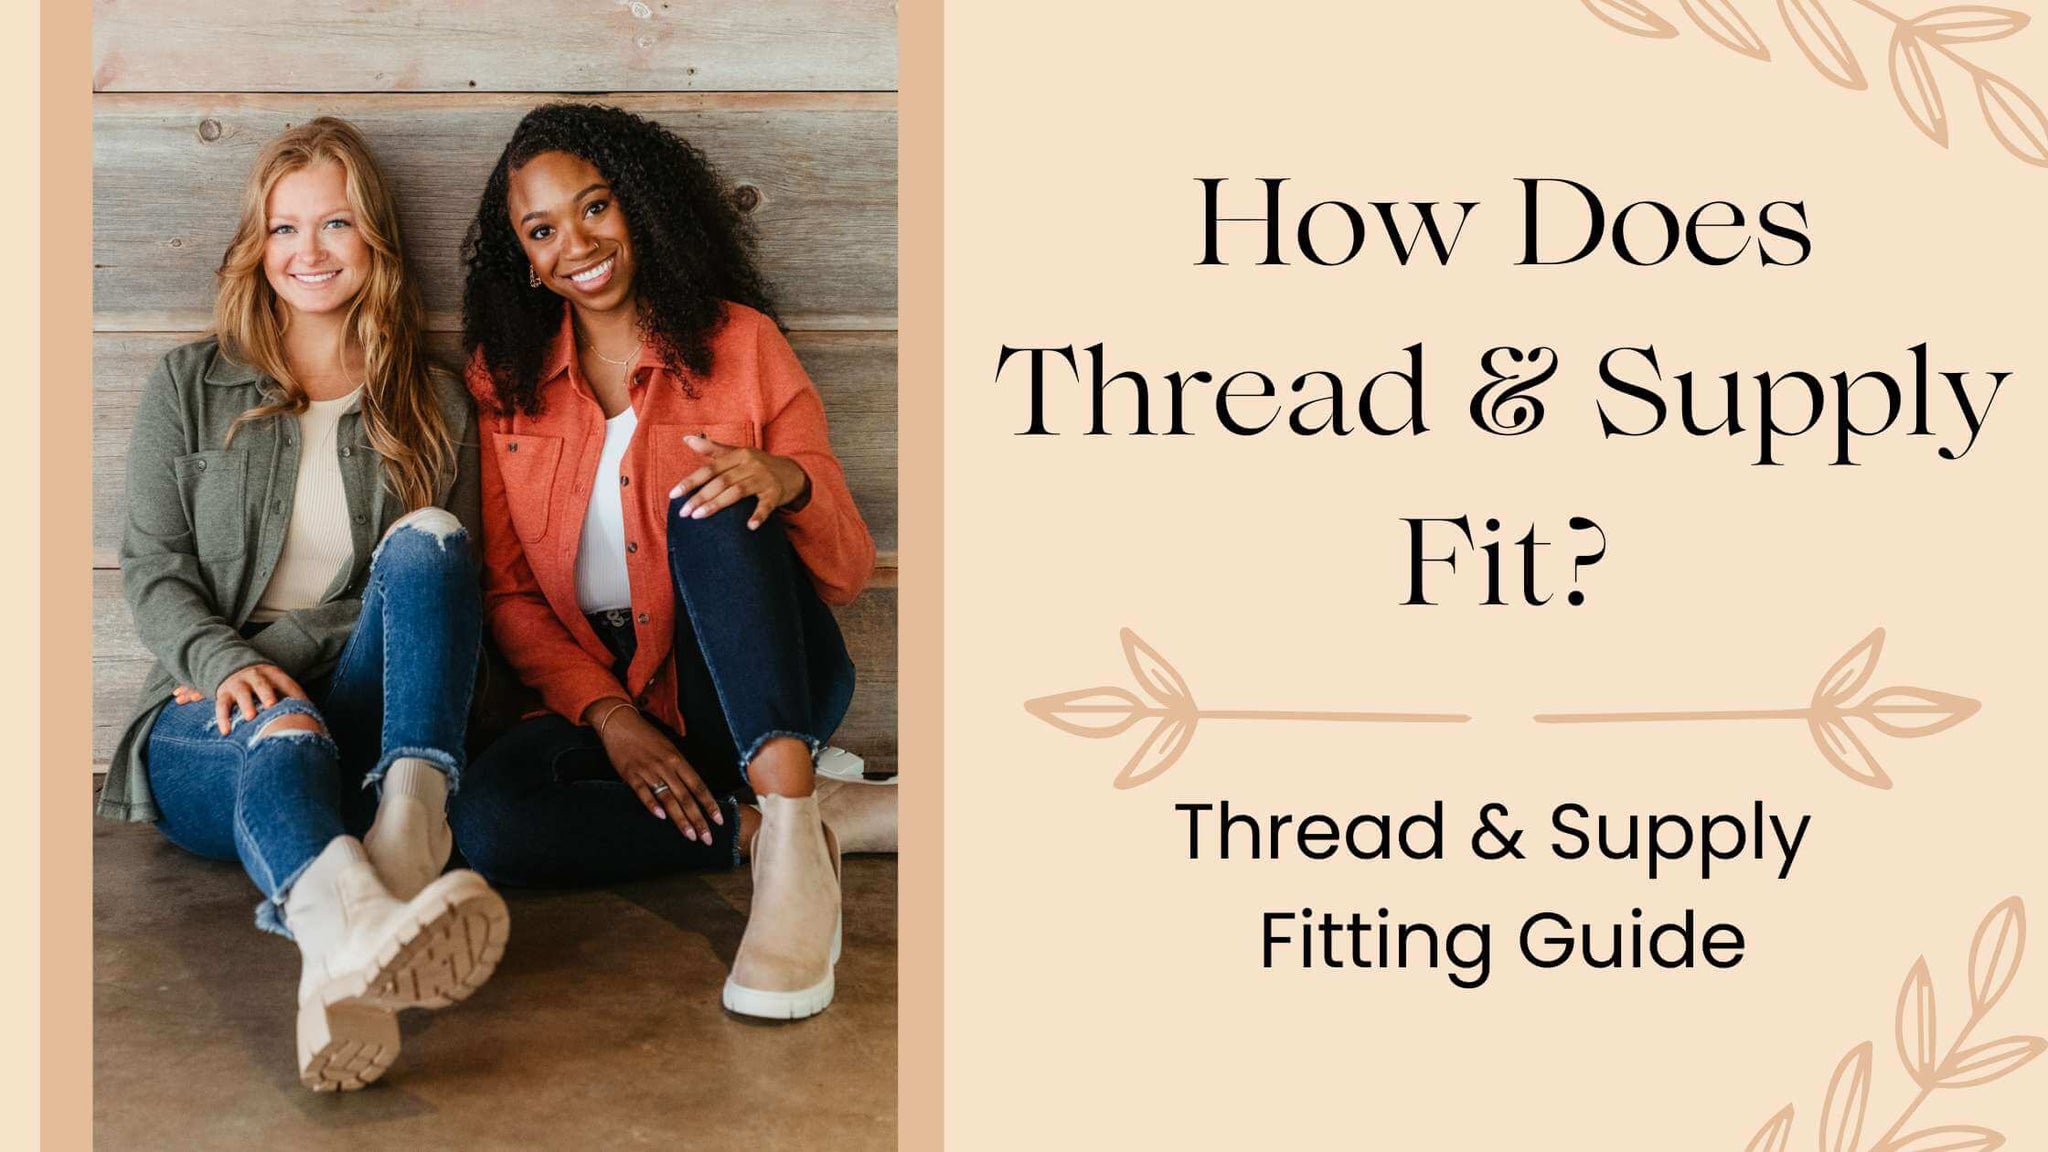 How Does Thread & Supply Fit?